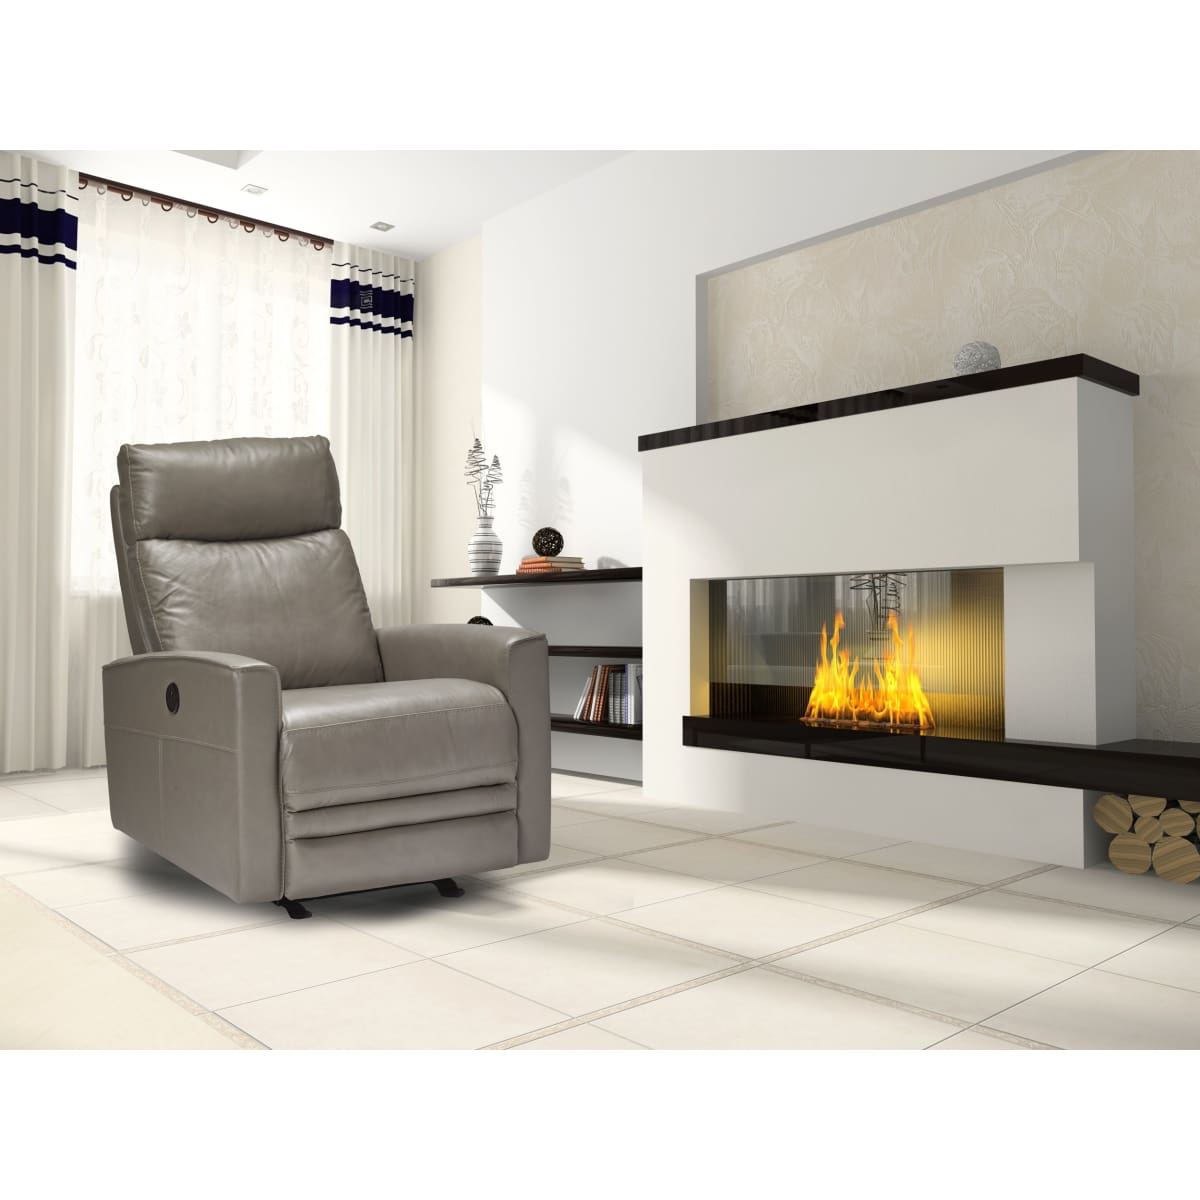 Chino Recliner chair - accent chairs